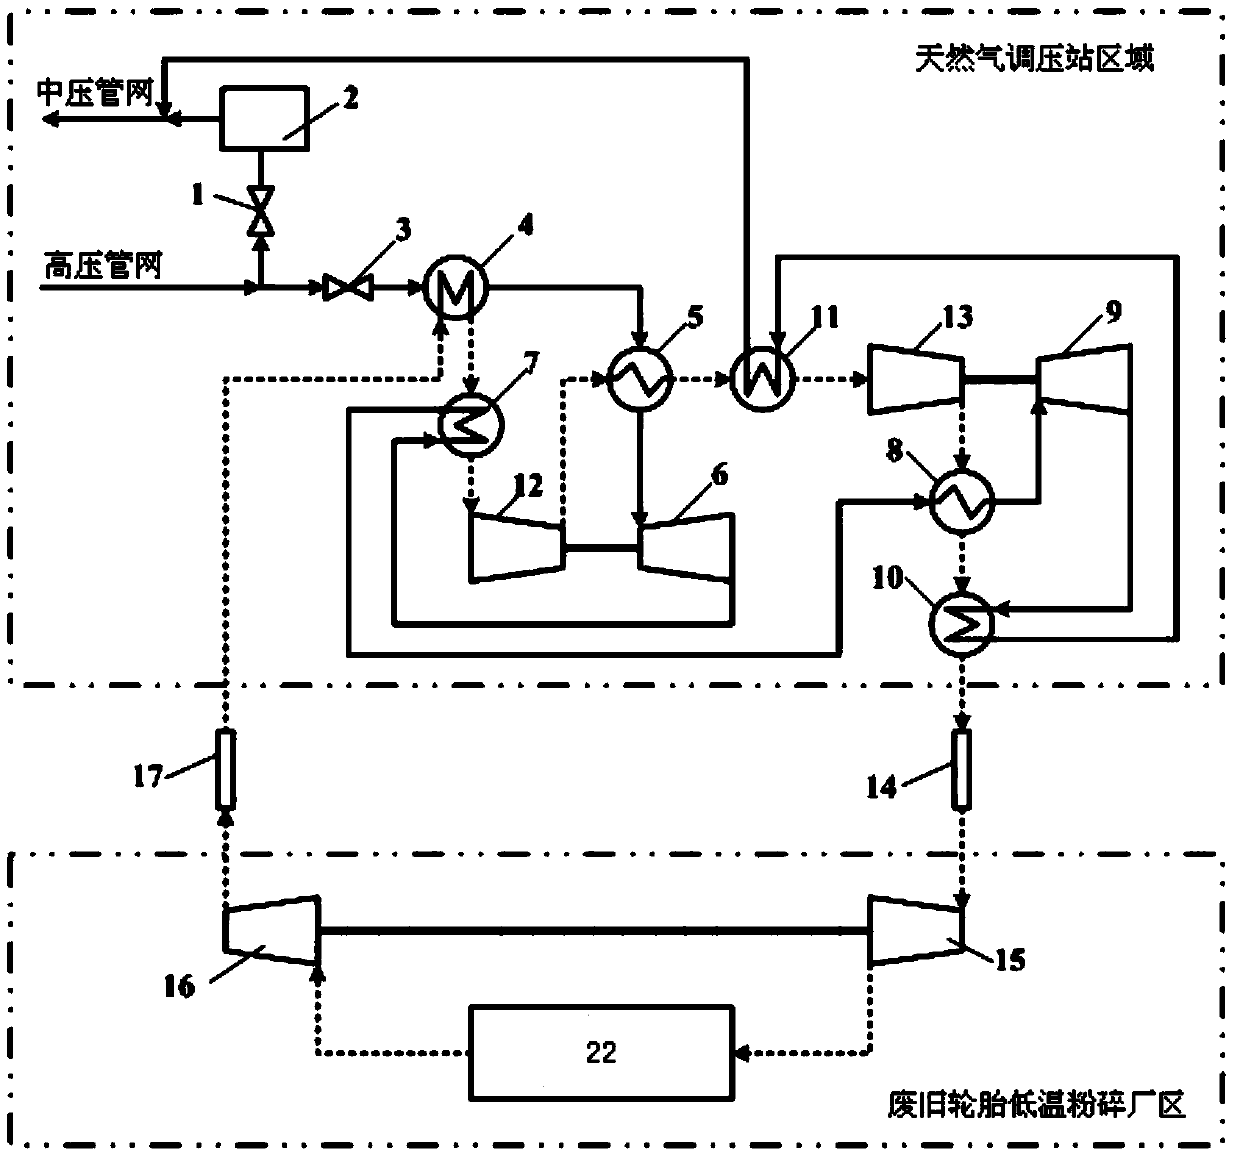 High-pressure natural gas pressure energy refrigeration method for junked tire cryogenic pulverization